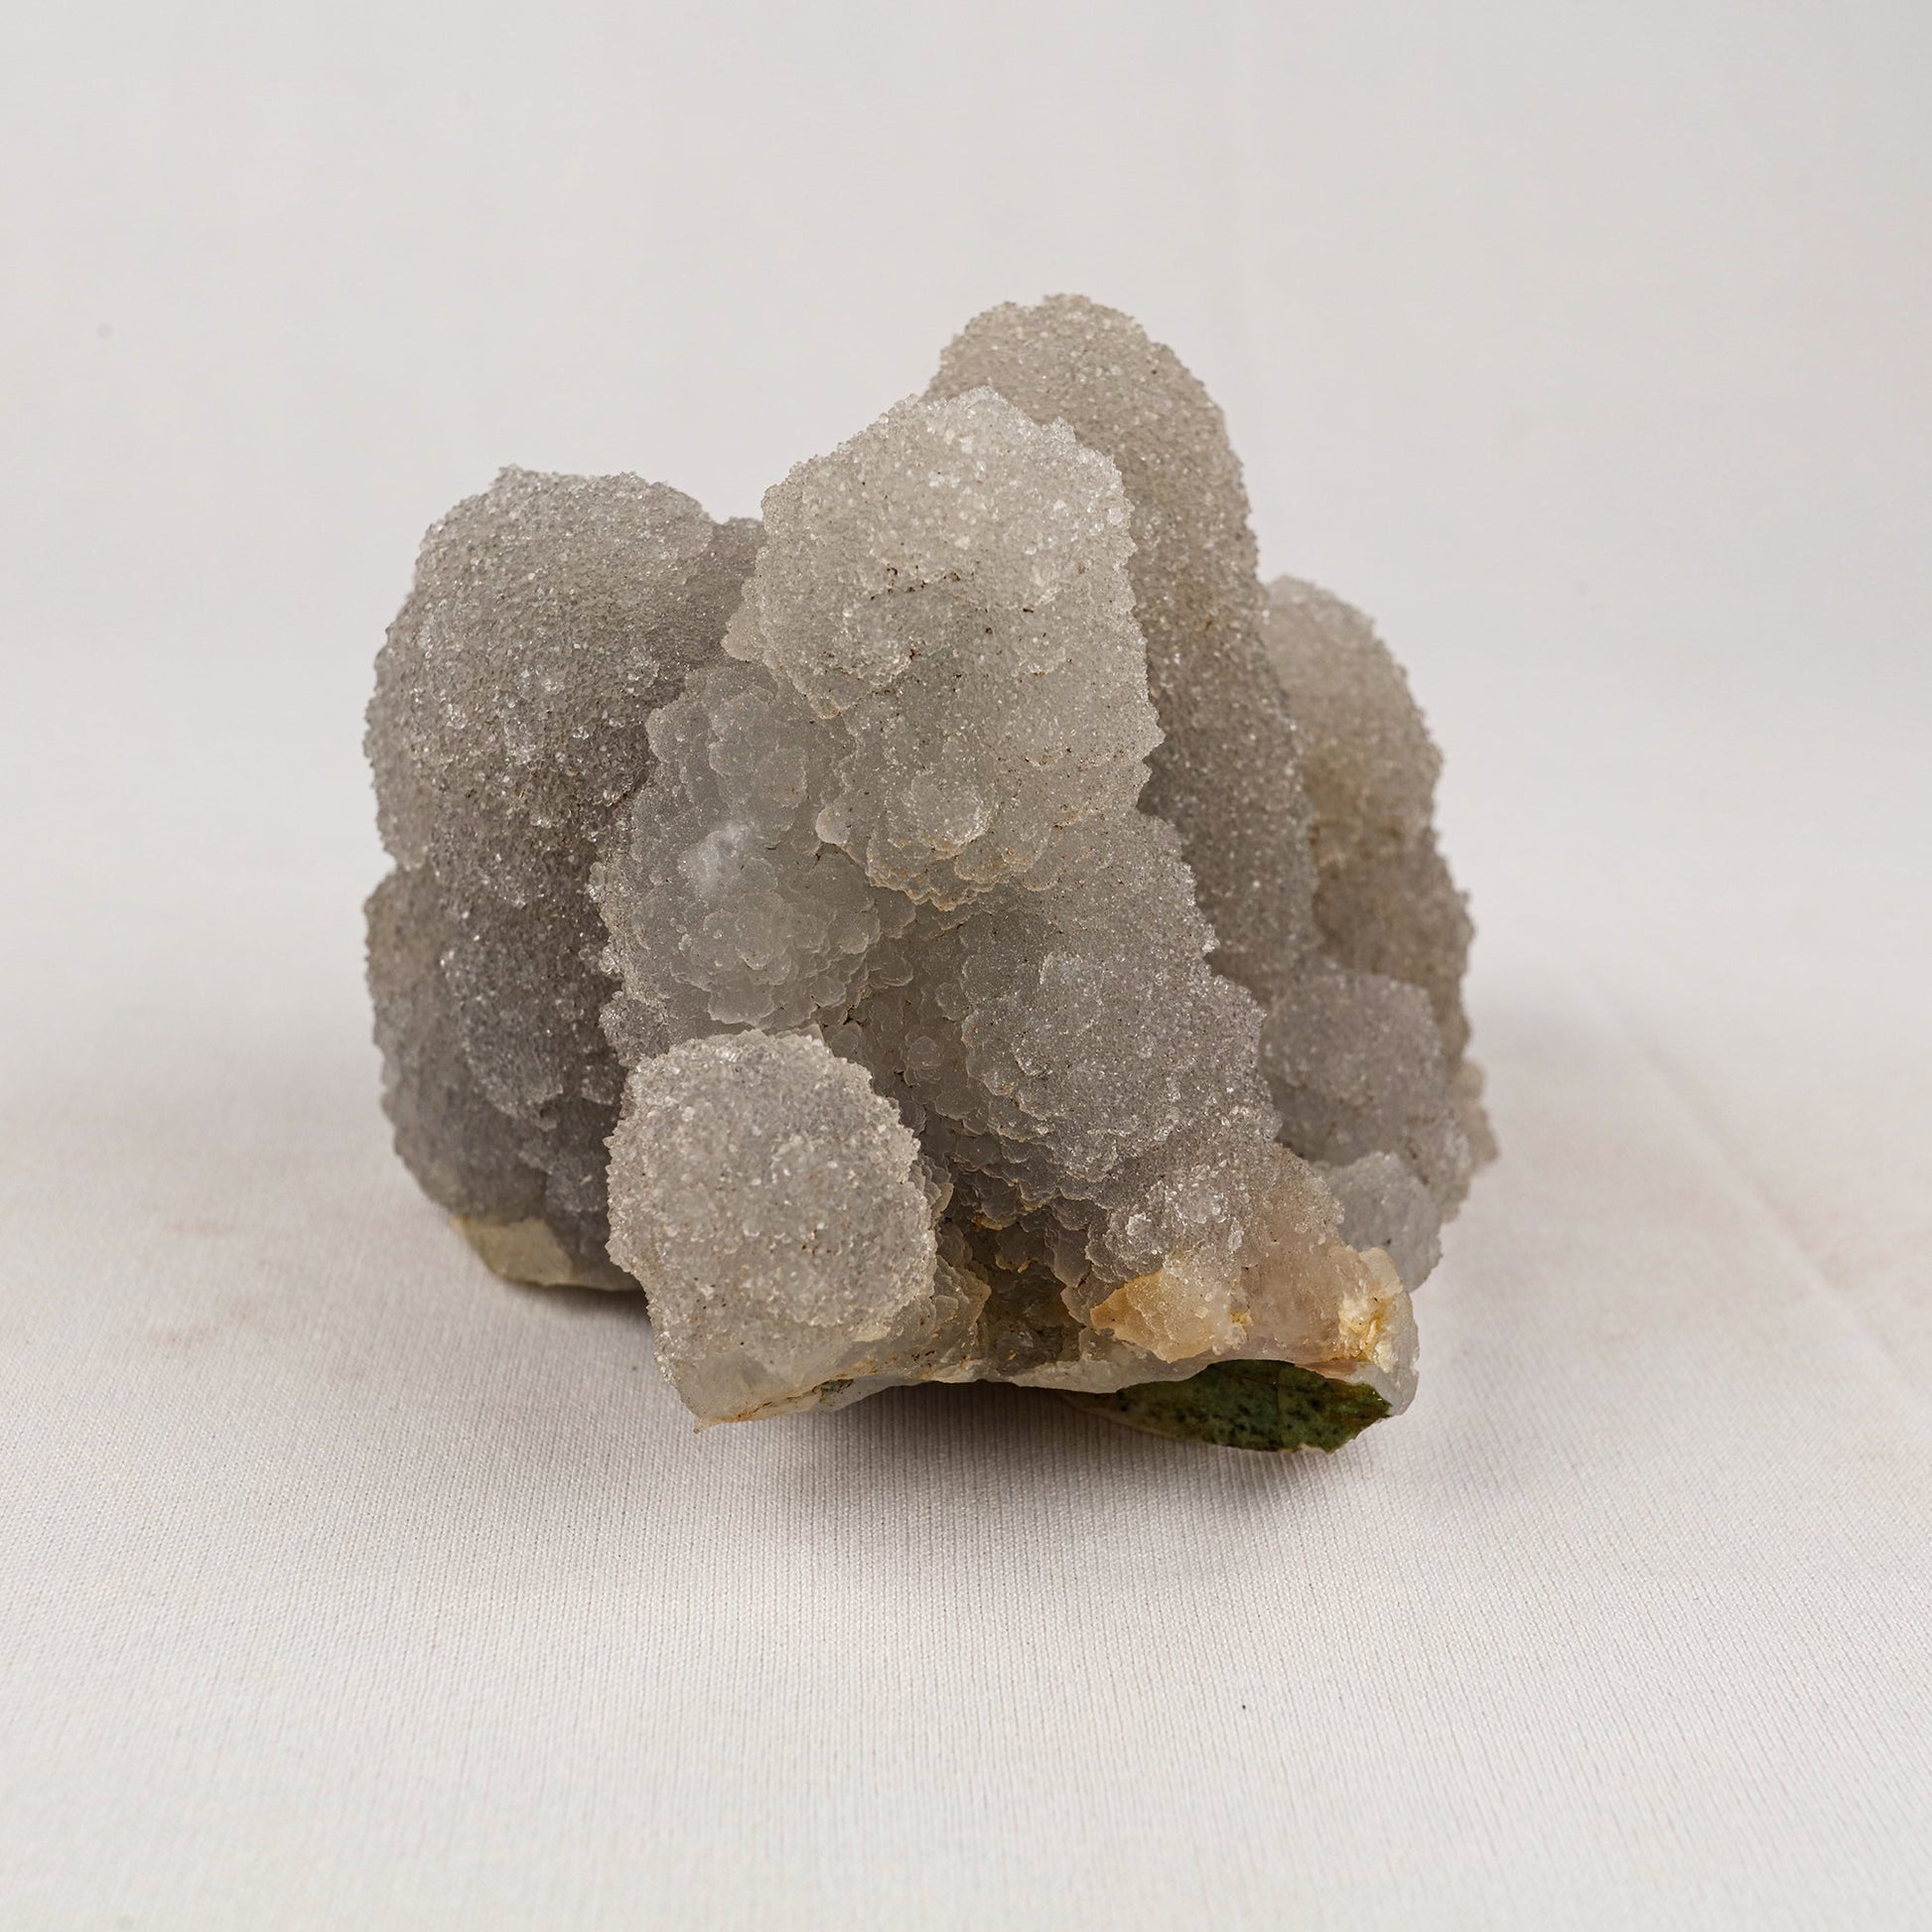 Chalcedony Stalactite Coral Formation Natural Mineral Specimen # B 5536 Chalcedony Superb Minerals 